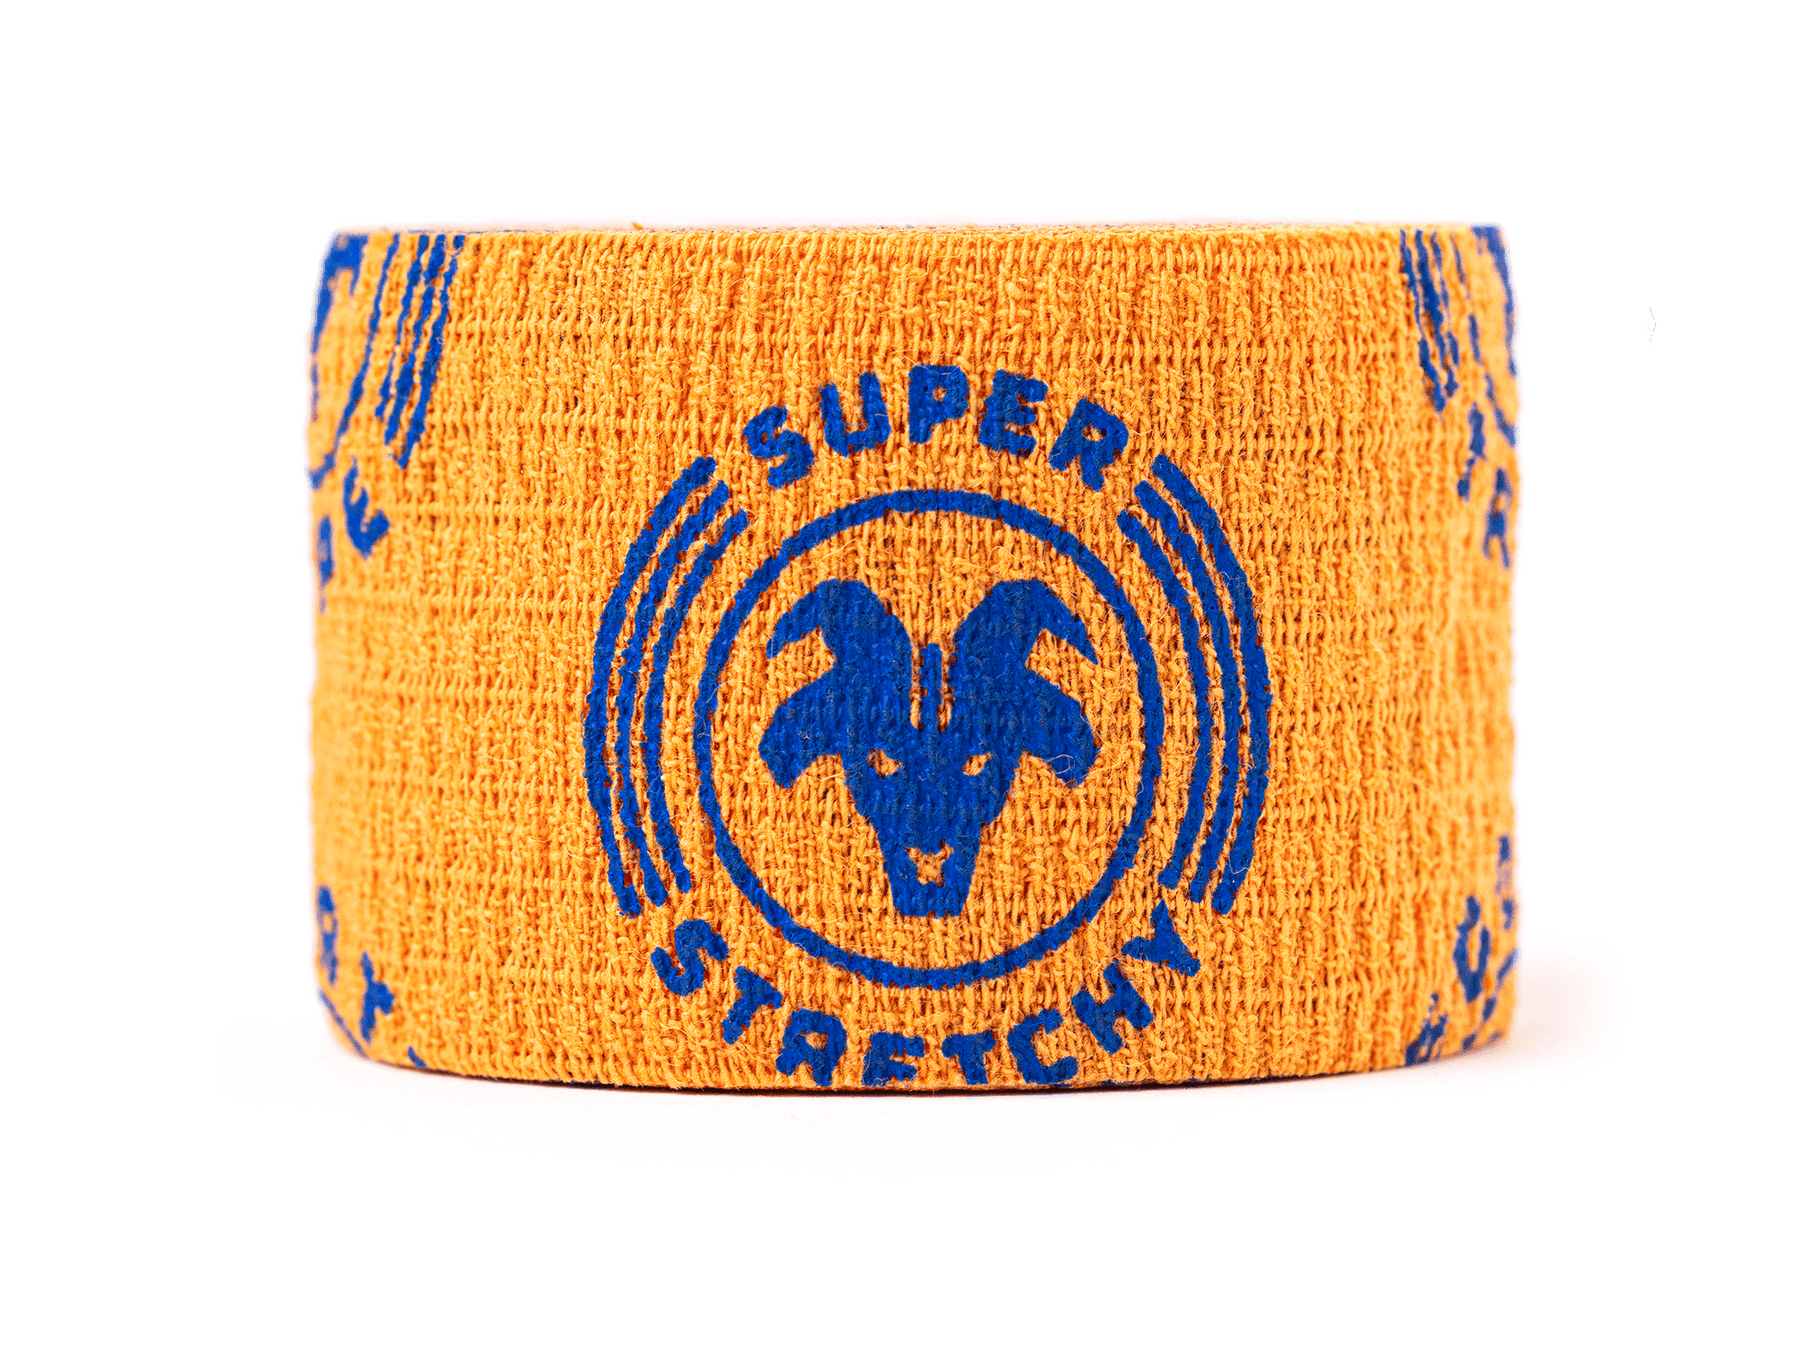 Goat Tape Super Stretchy Thumb Tape - Weightlifting Hook Grip Tape & Wod Tape for Cross Training, Gym Workout Tape, Athletic Finger Wrap - Flexes